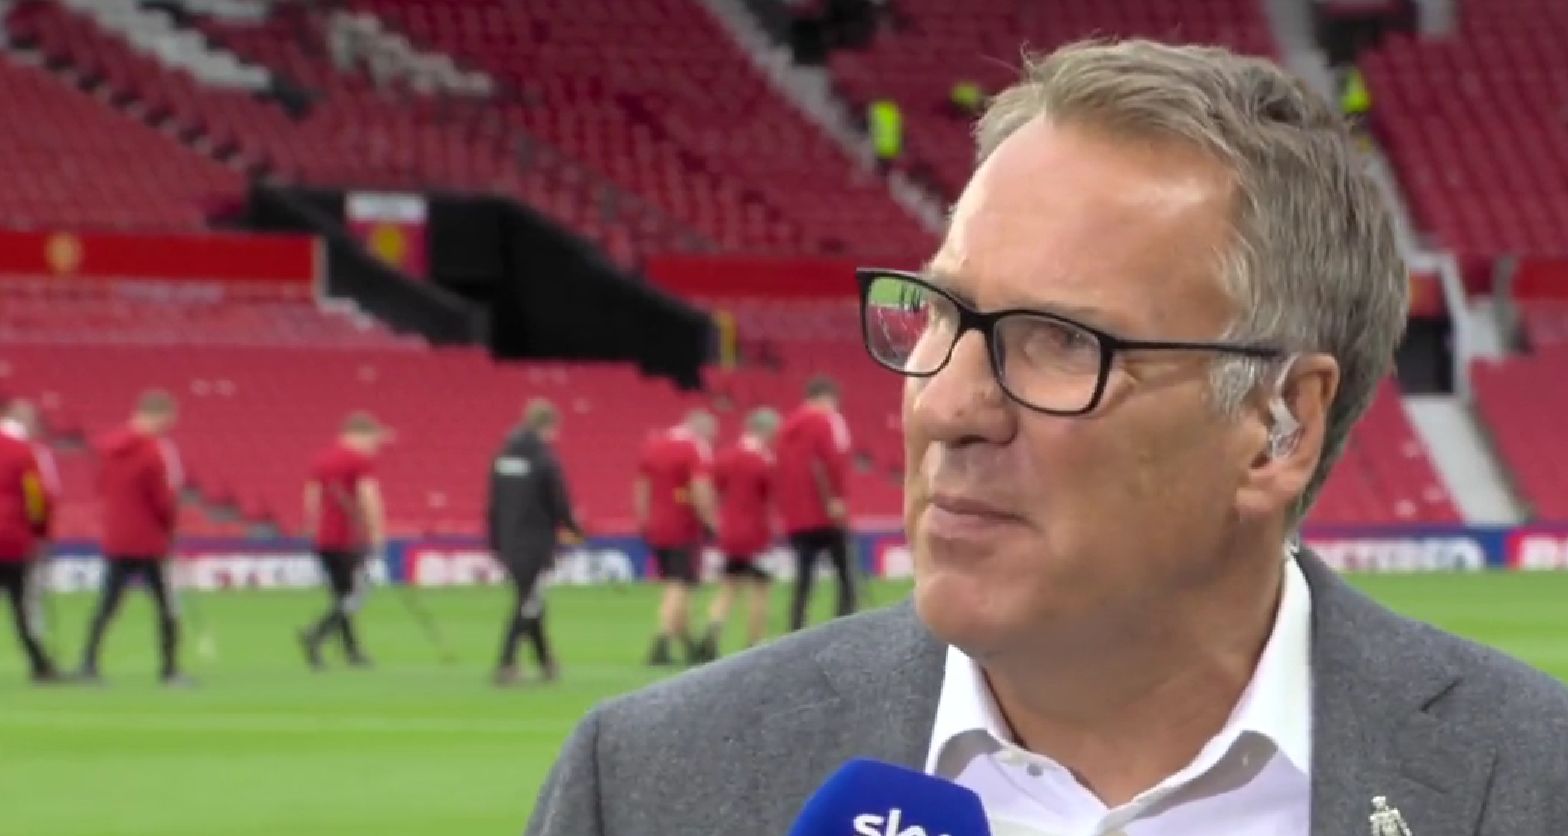 ‘I’D BE SHOCKED’: PAUL MERSON SAYS £200,000-A-WEEK PLAYER WILL LEAVE LIVERPOOL FOR SURE